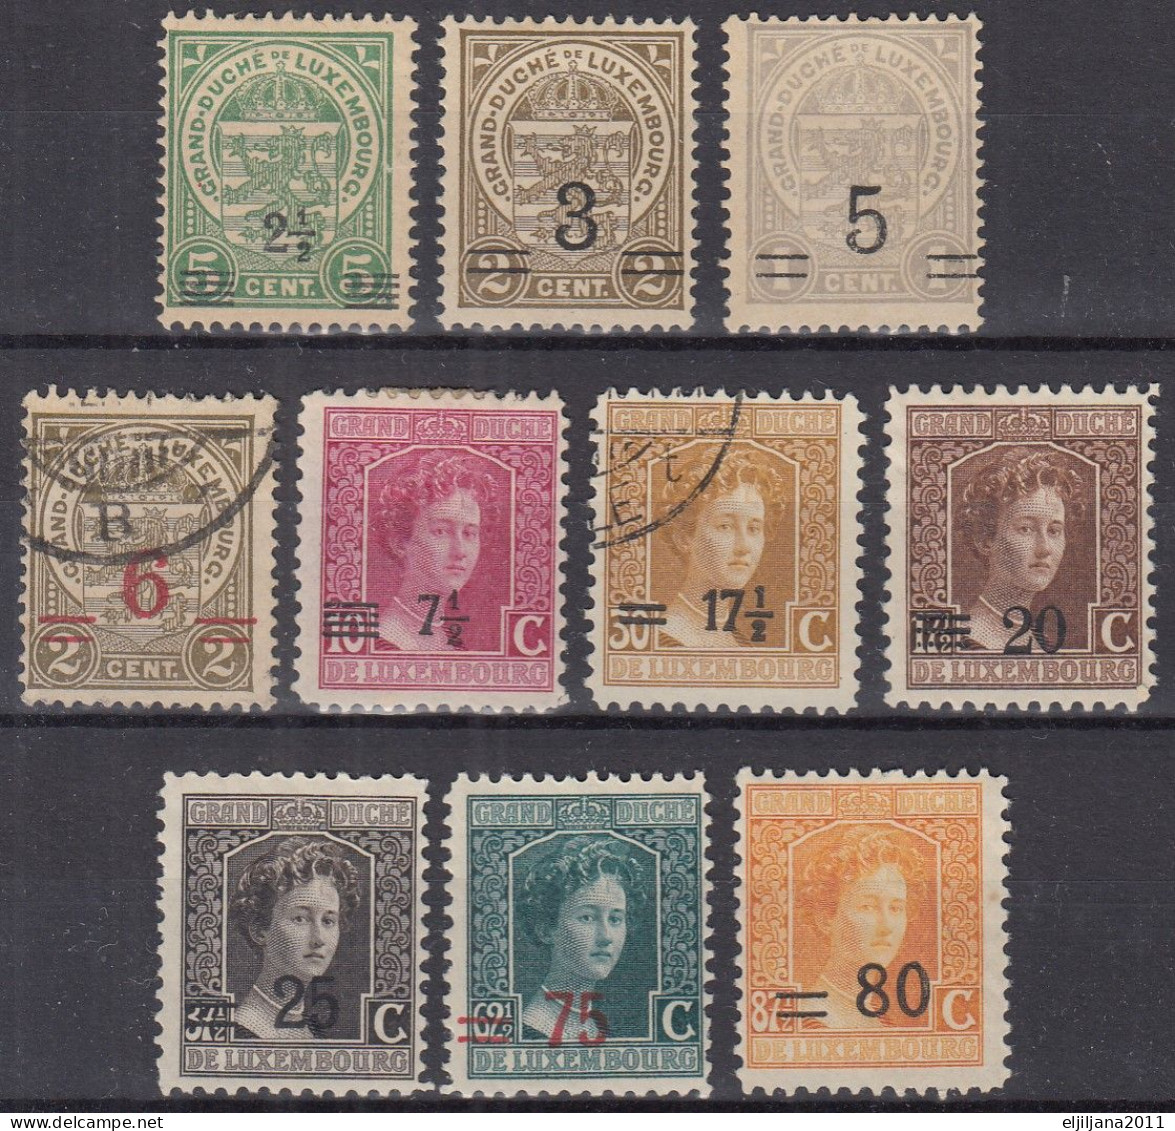 Action !! SALE !! 50 % OFF !! ⁕ LUXEMBOURG 1915 ⁕ Overprint / Surcharge ⁕ 10v MH & Used - 1914-24 Marie-Adélaïde